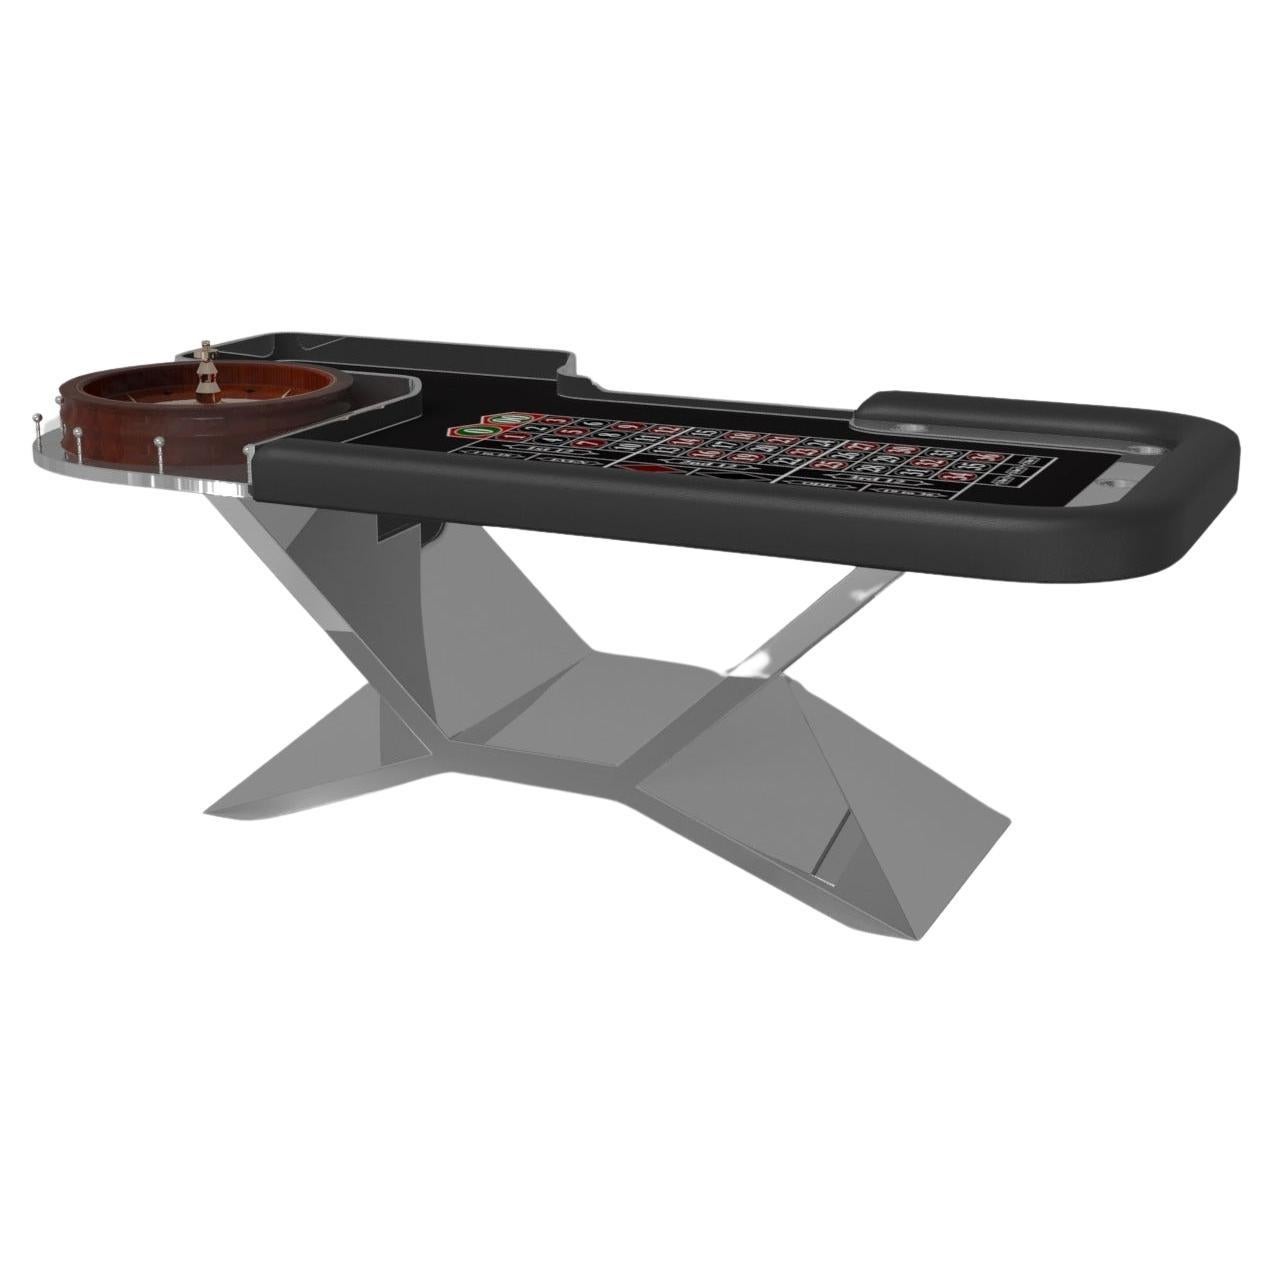 Elevate Customs Kors Roulette Tables / Stainless Steel Sheet Metal in 8'2" - USA